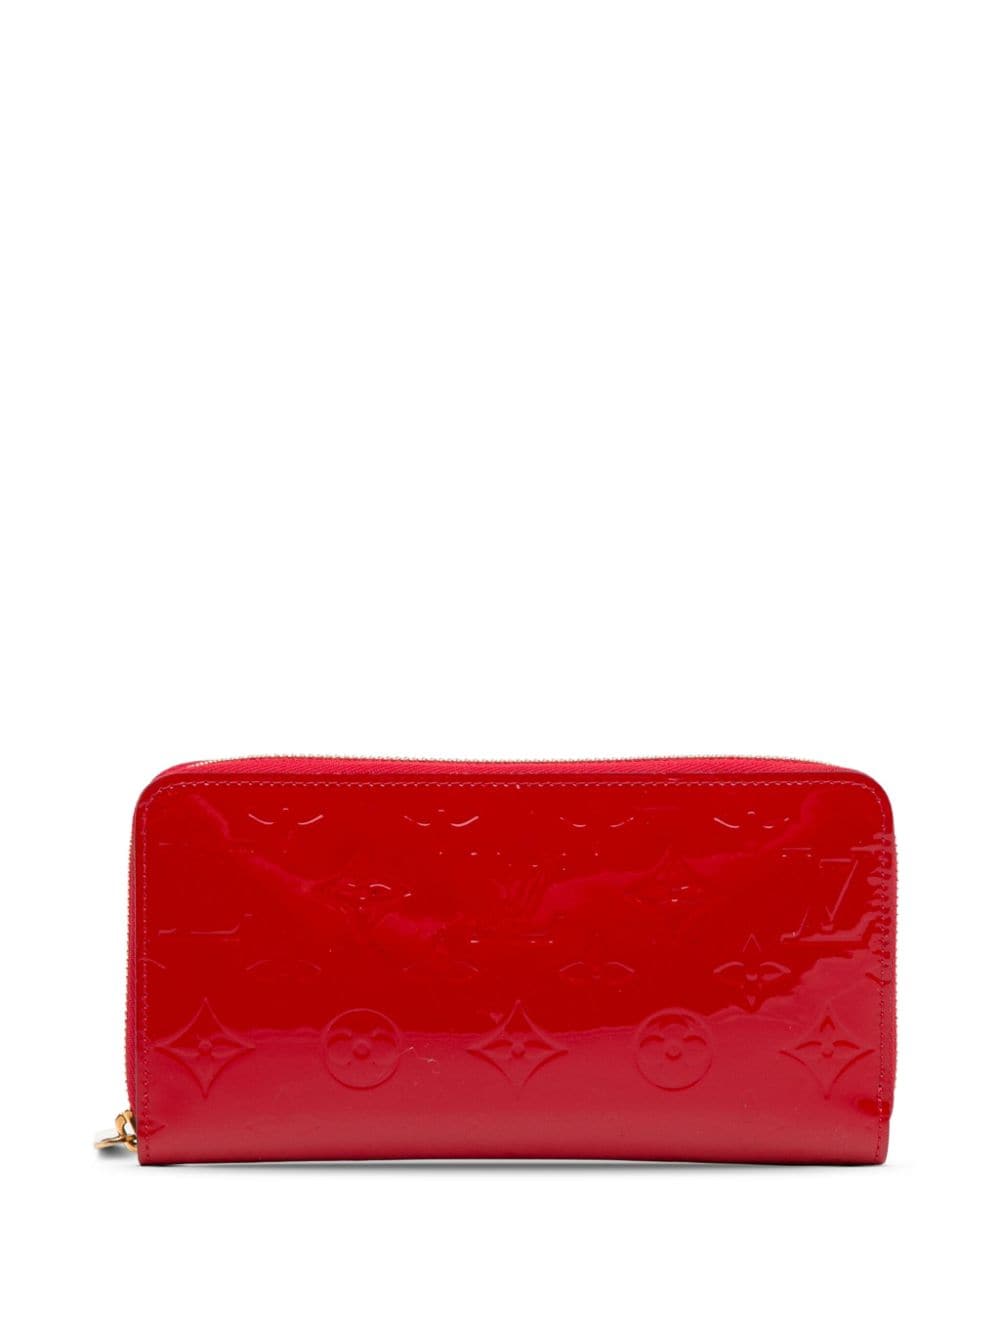 Pre-owned Louis Vuitton Monogram Vernis Zippy 长款钱包（2017年典藏款） In Red